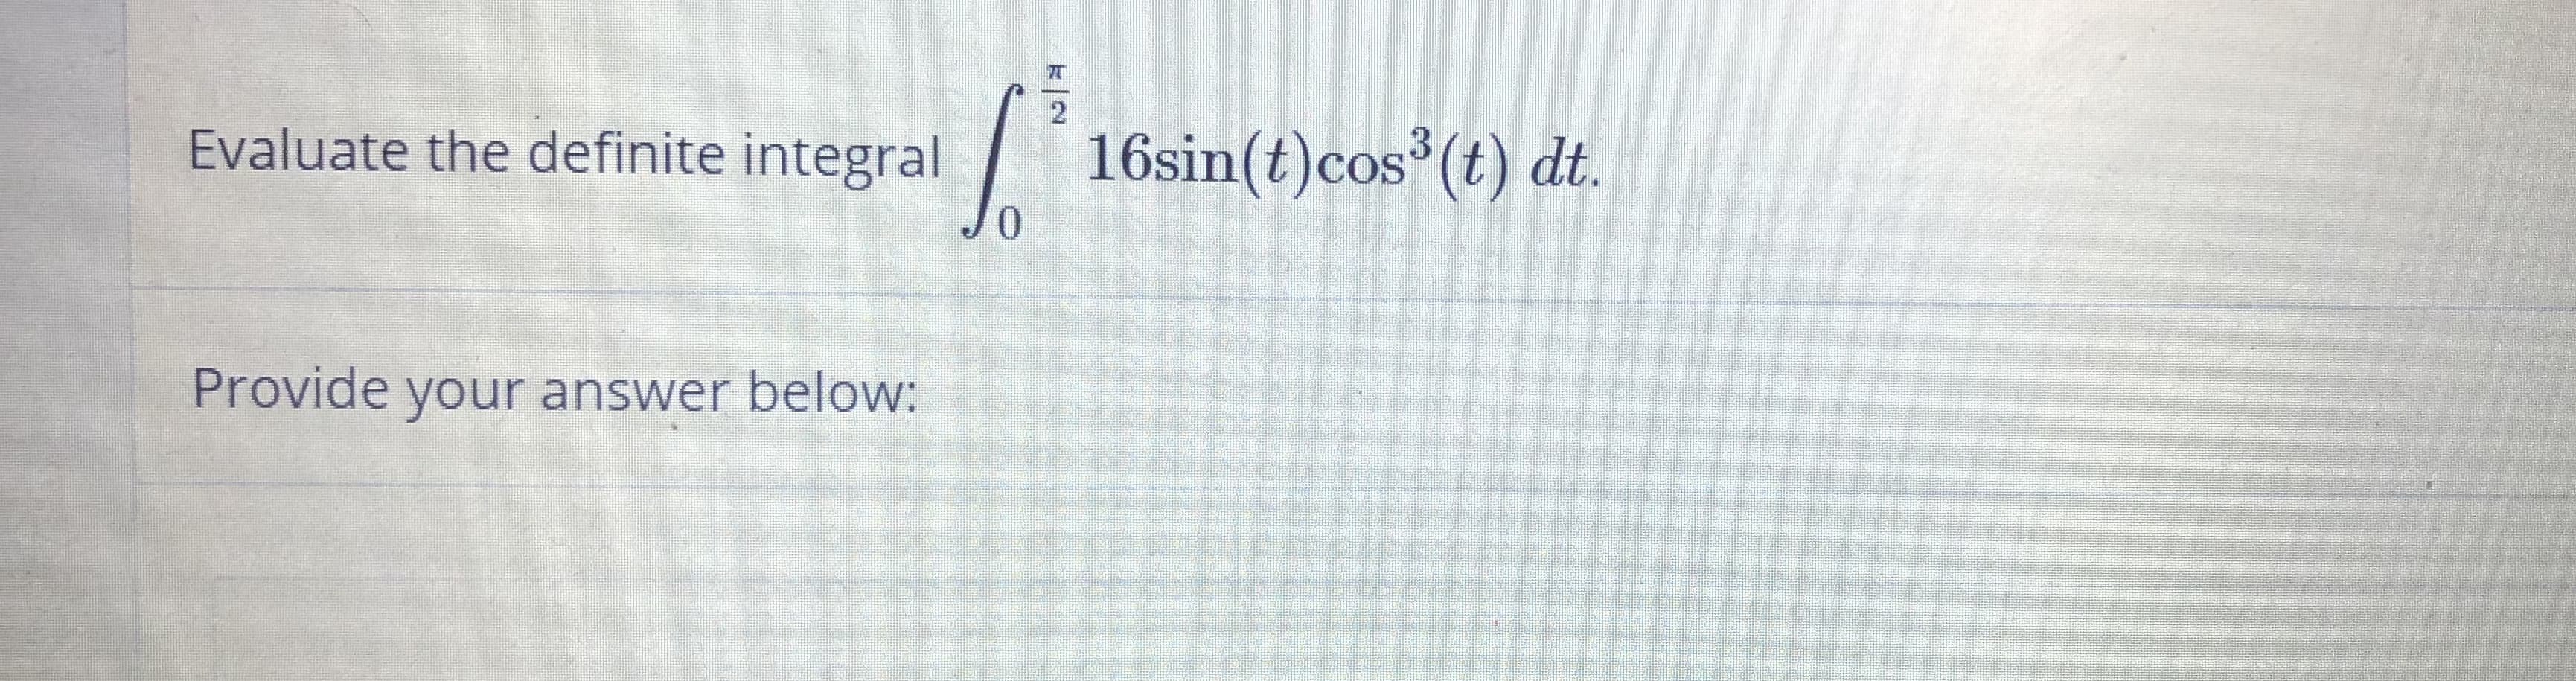 2
Evaluate the definite integral
16sin(t)cos (t) dt.
